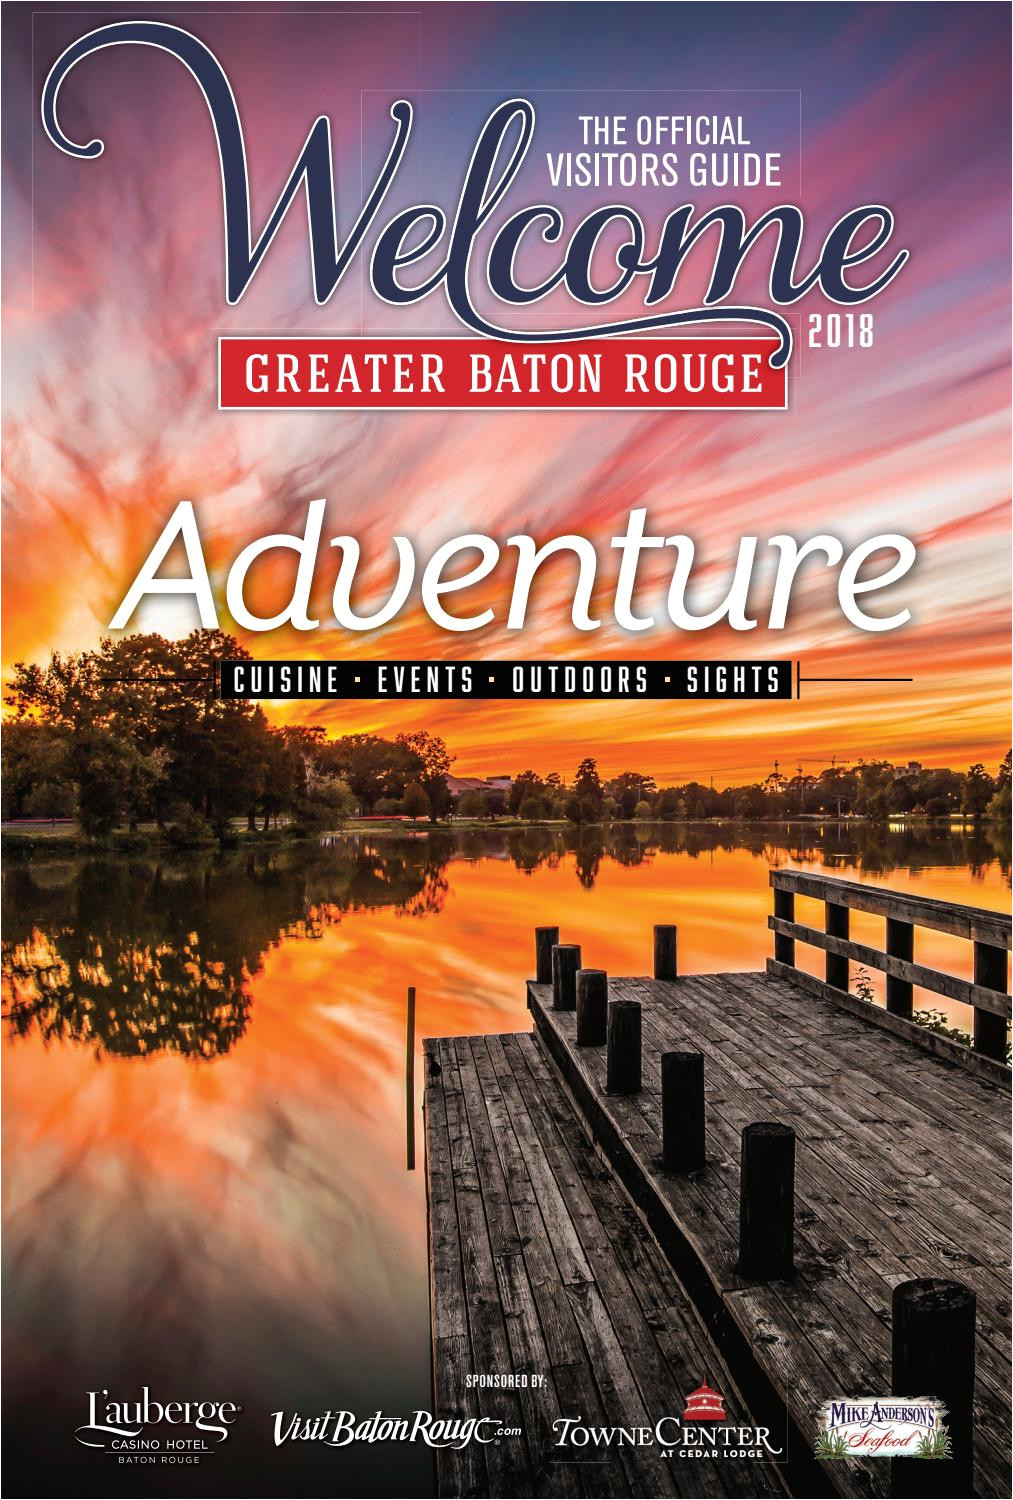 White Light Night Baton Rouge November 2019 2018 Welcome the Official Visitors Guide to Greater Baton Rouge by